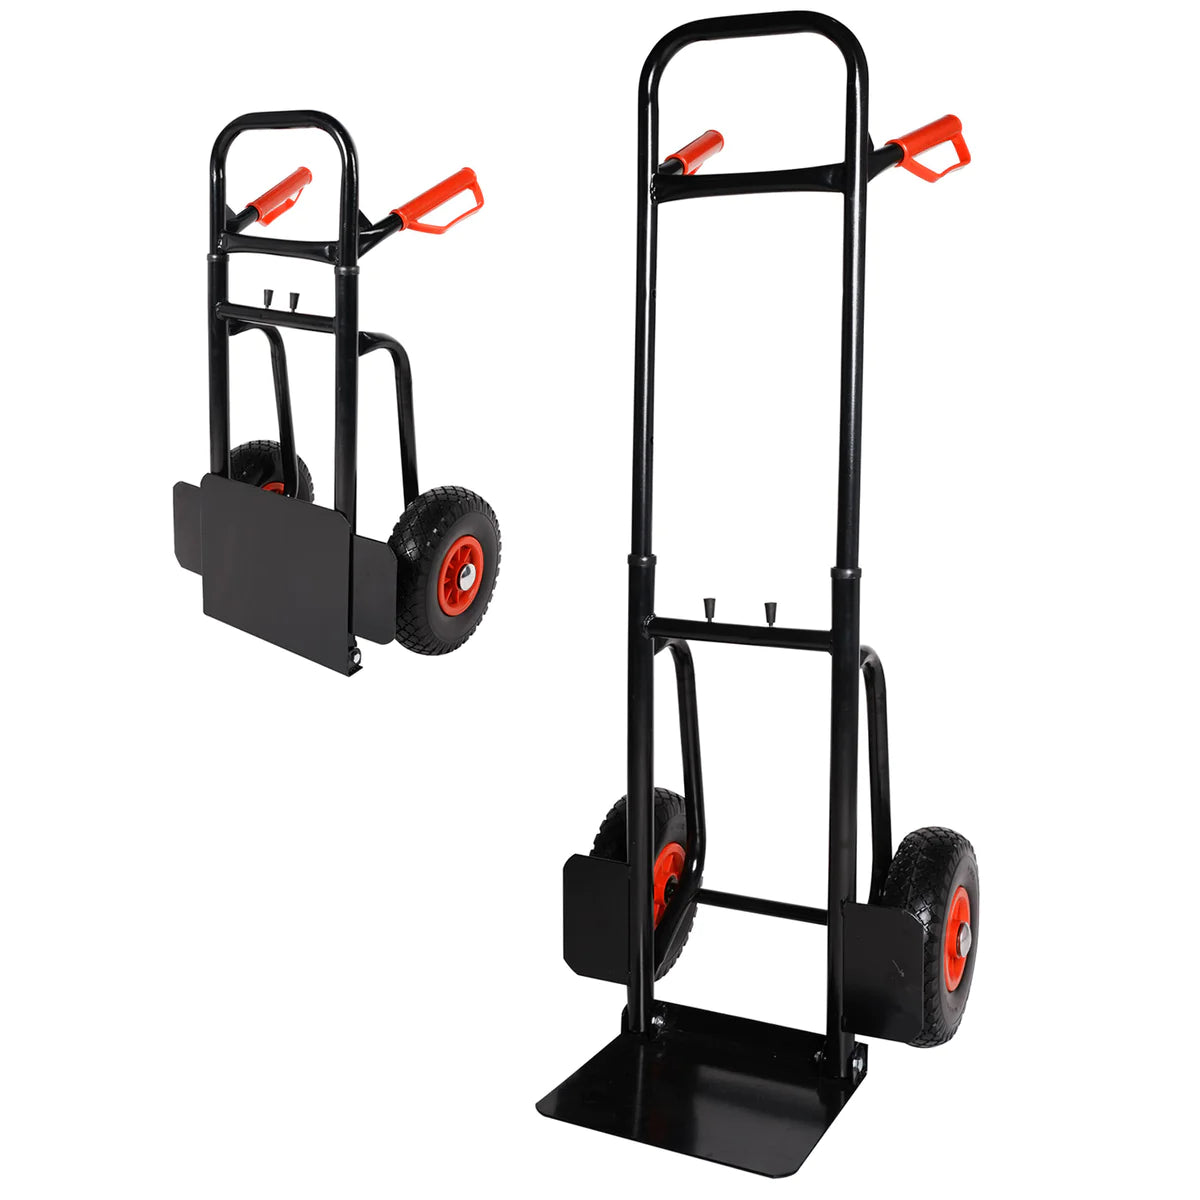 Two-wheeled trolley with Telescope Handle Adjustable height, 440lbs Capacity